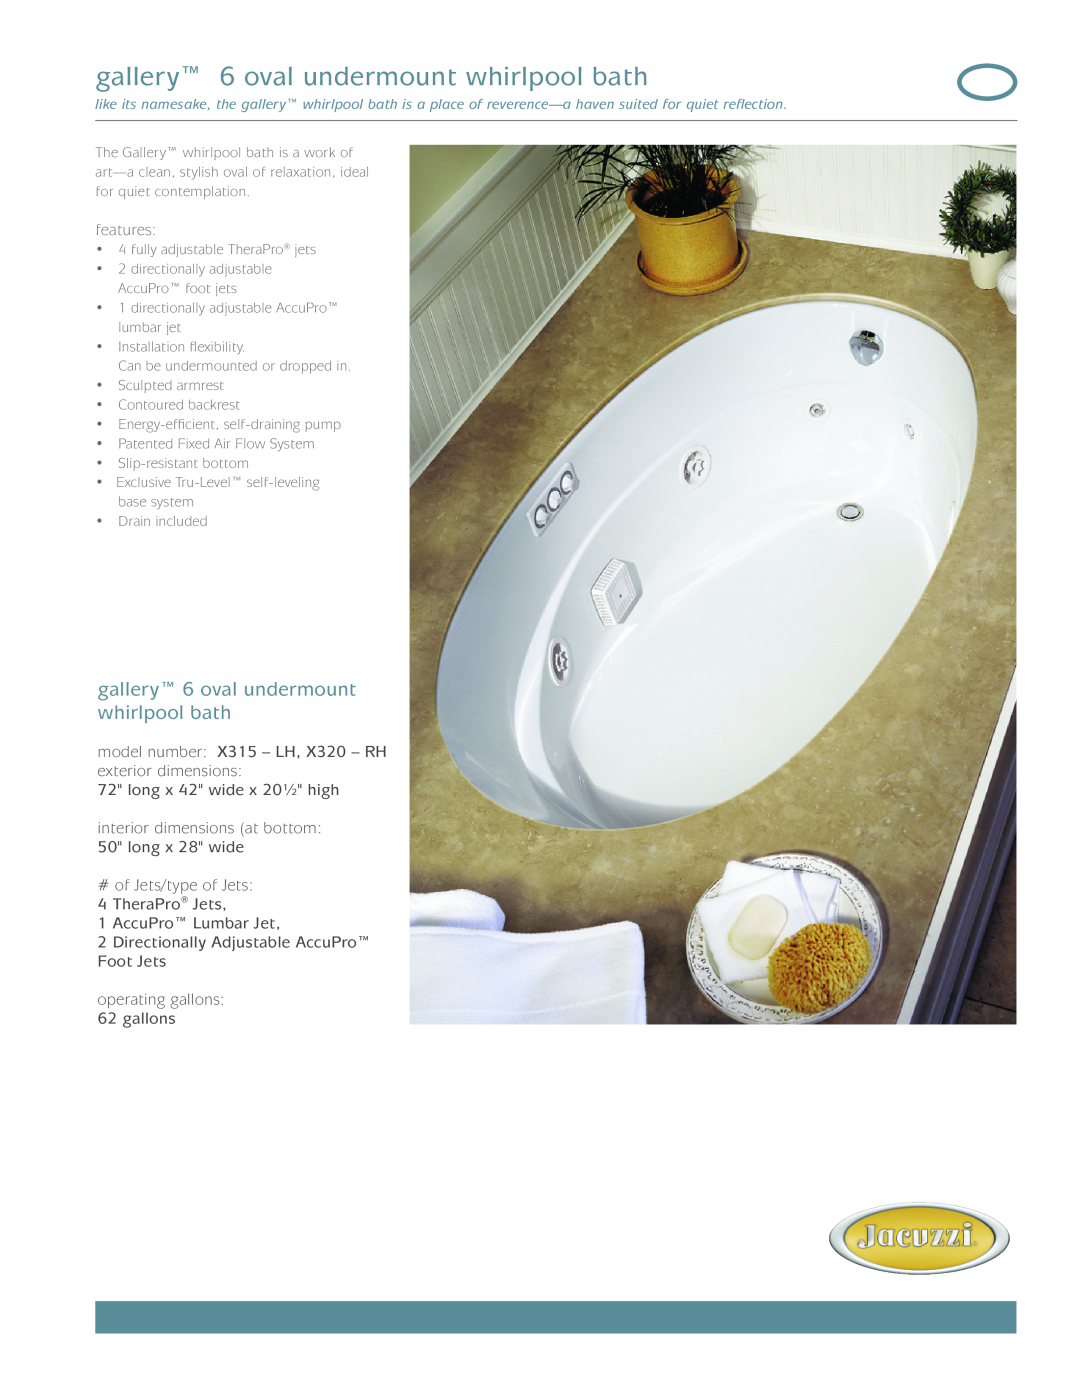 Jacuzzi X315-LH, X320-RH dimensions gallery 6 oval undermount whirlpool bath, features, long x 42 wide x 20½ high 